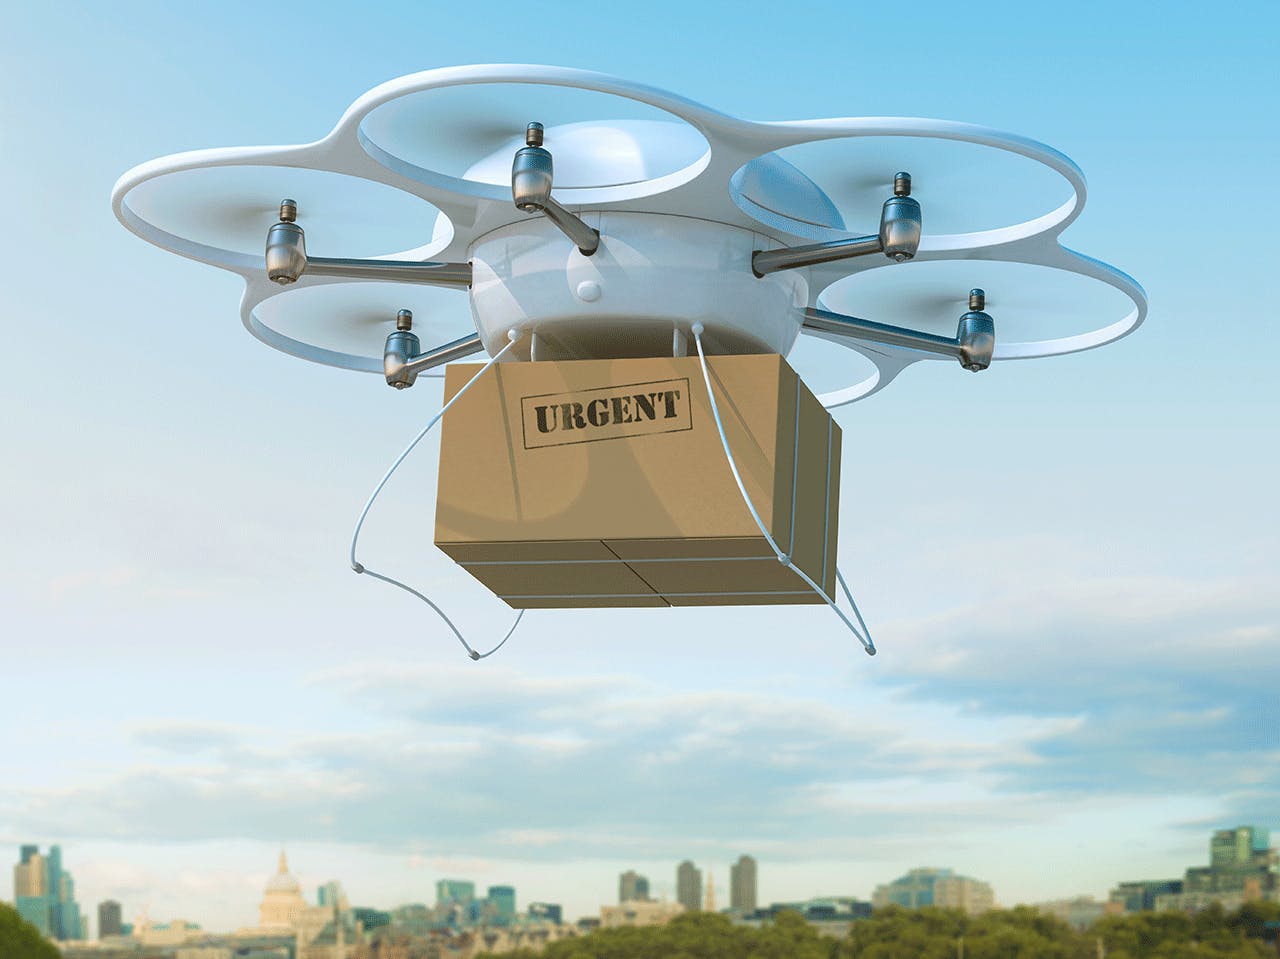 Environmentally Friendly
Drone Delivery